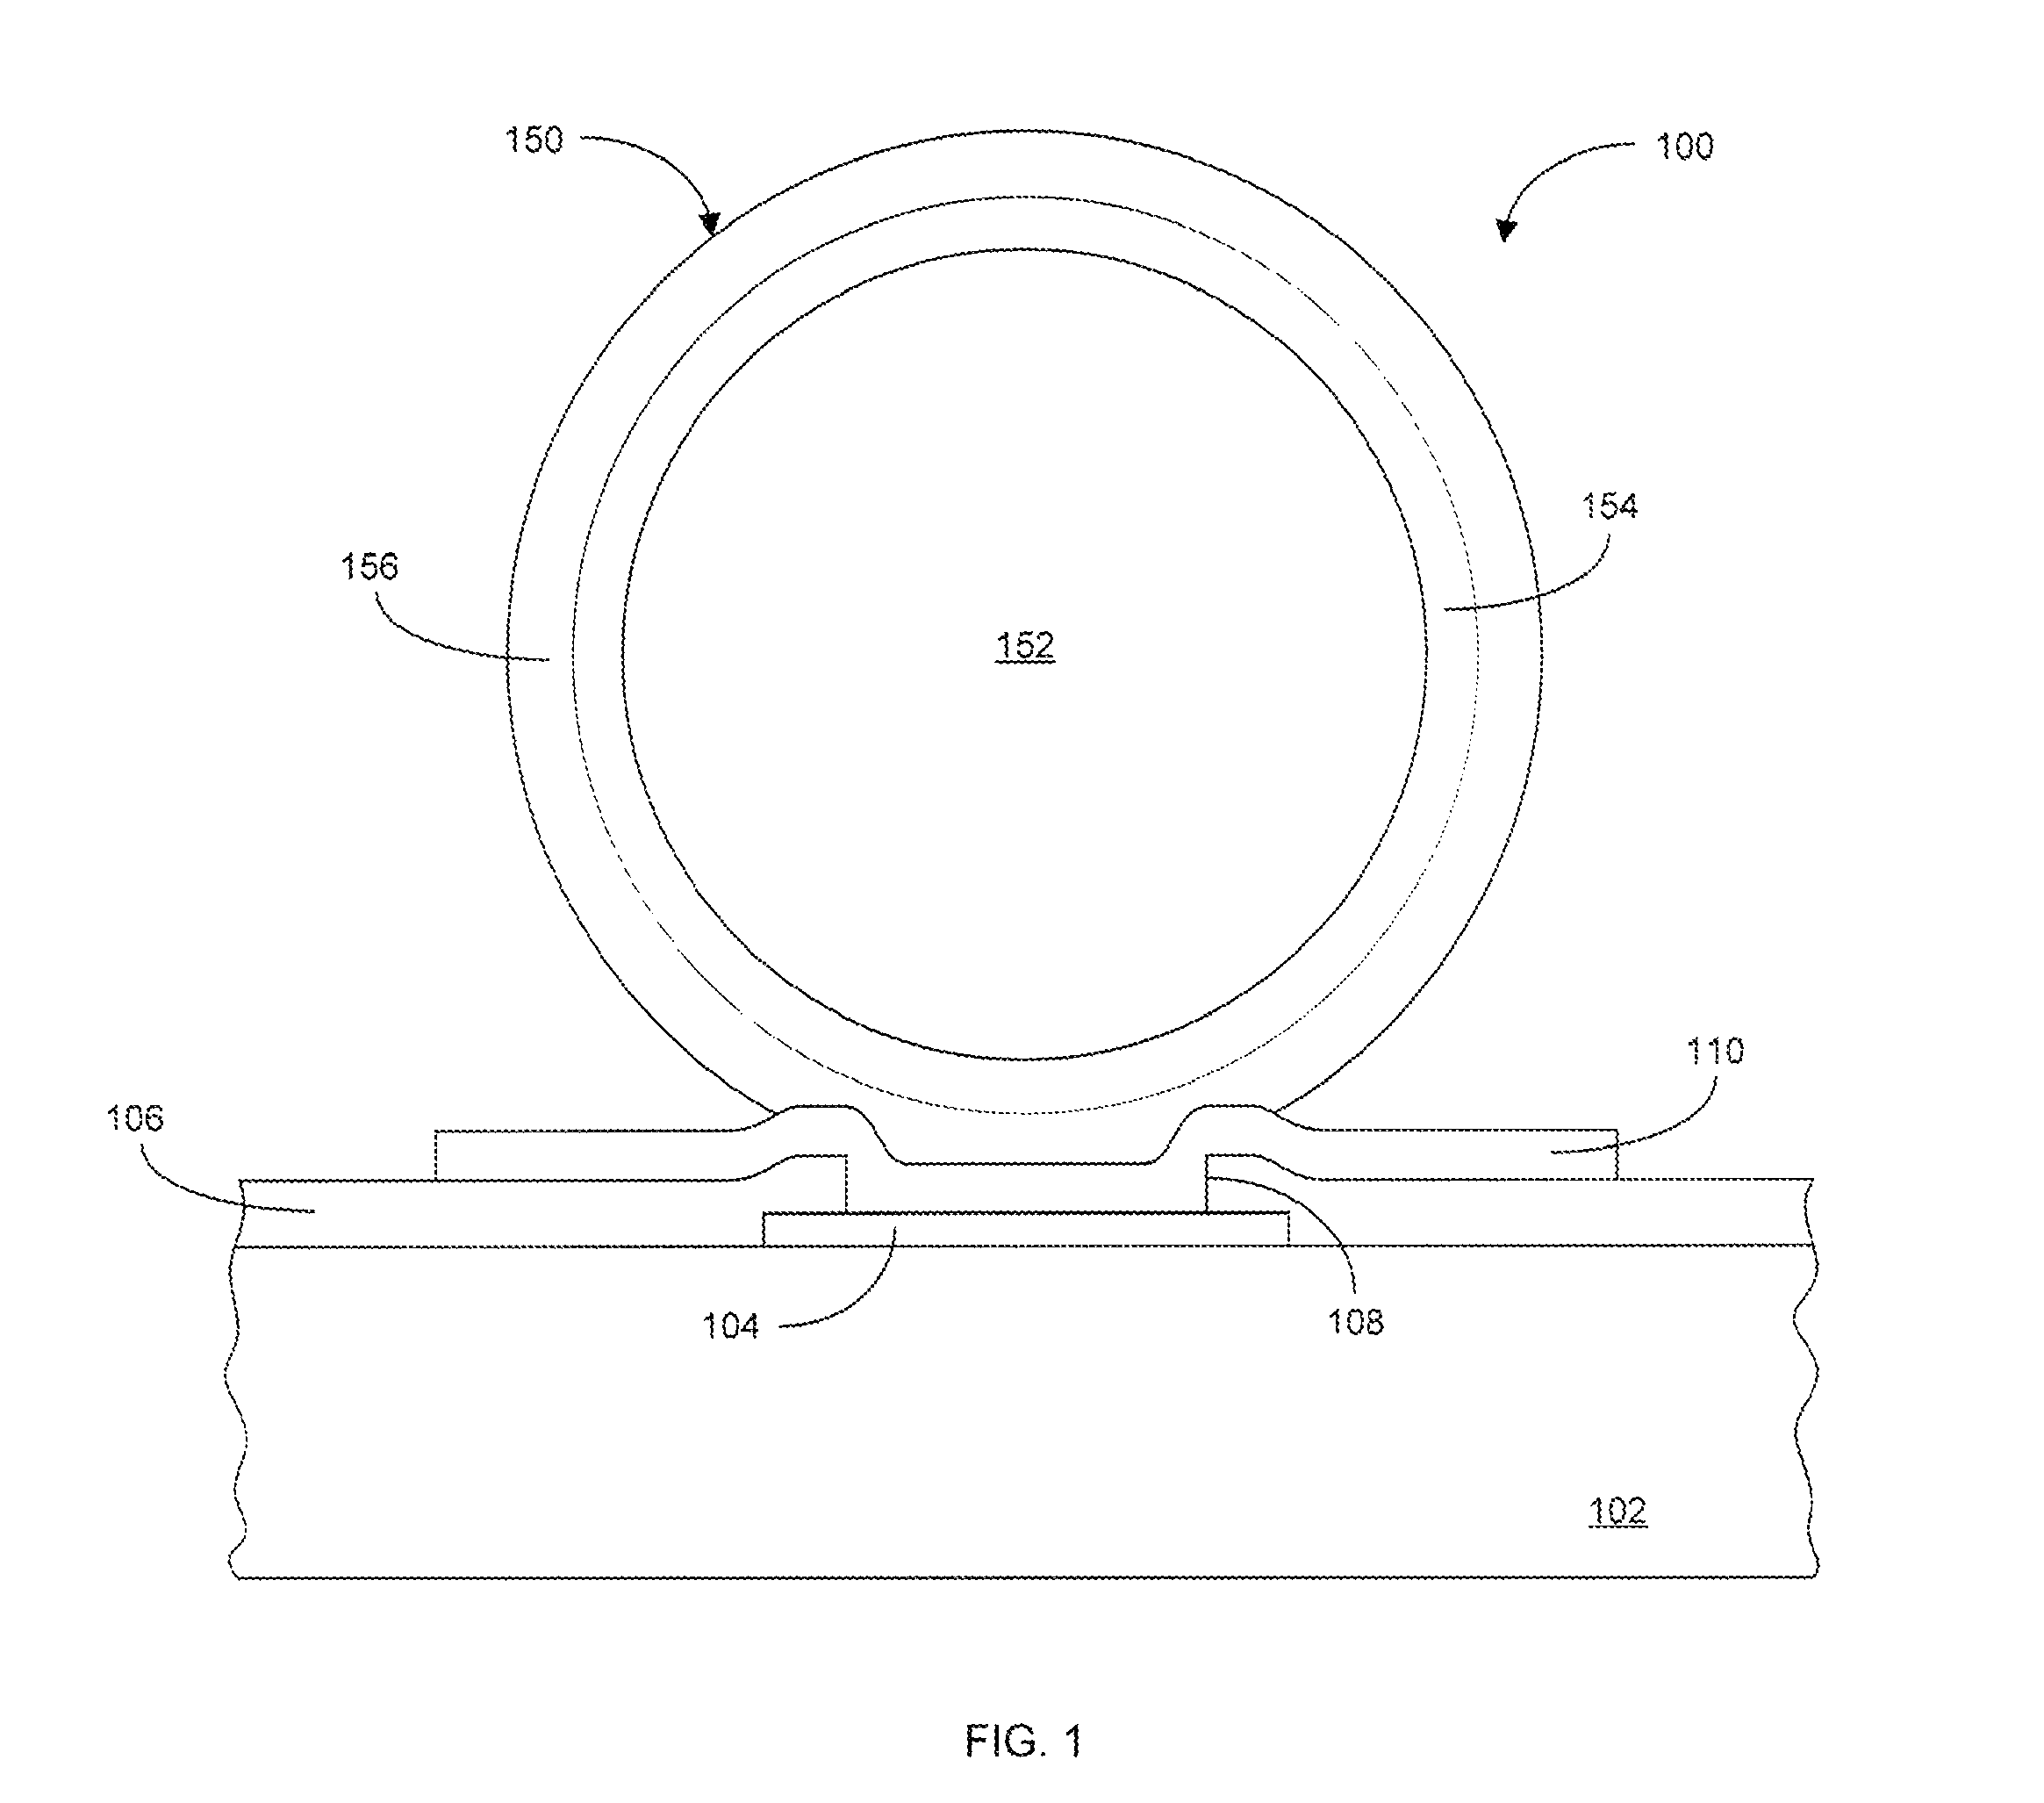 Wafer level package integrated circuit incorporating solder balls containing an organic plastic-core